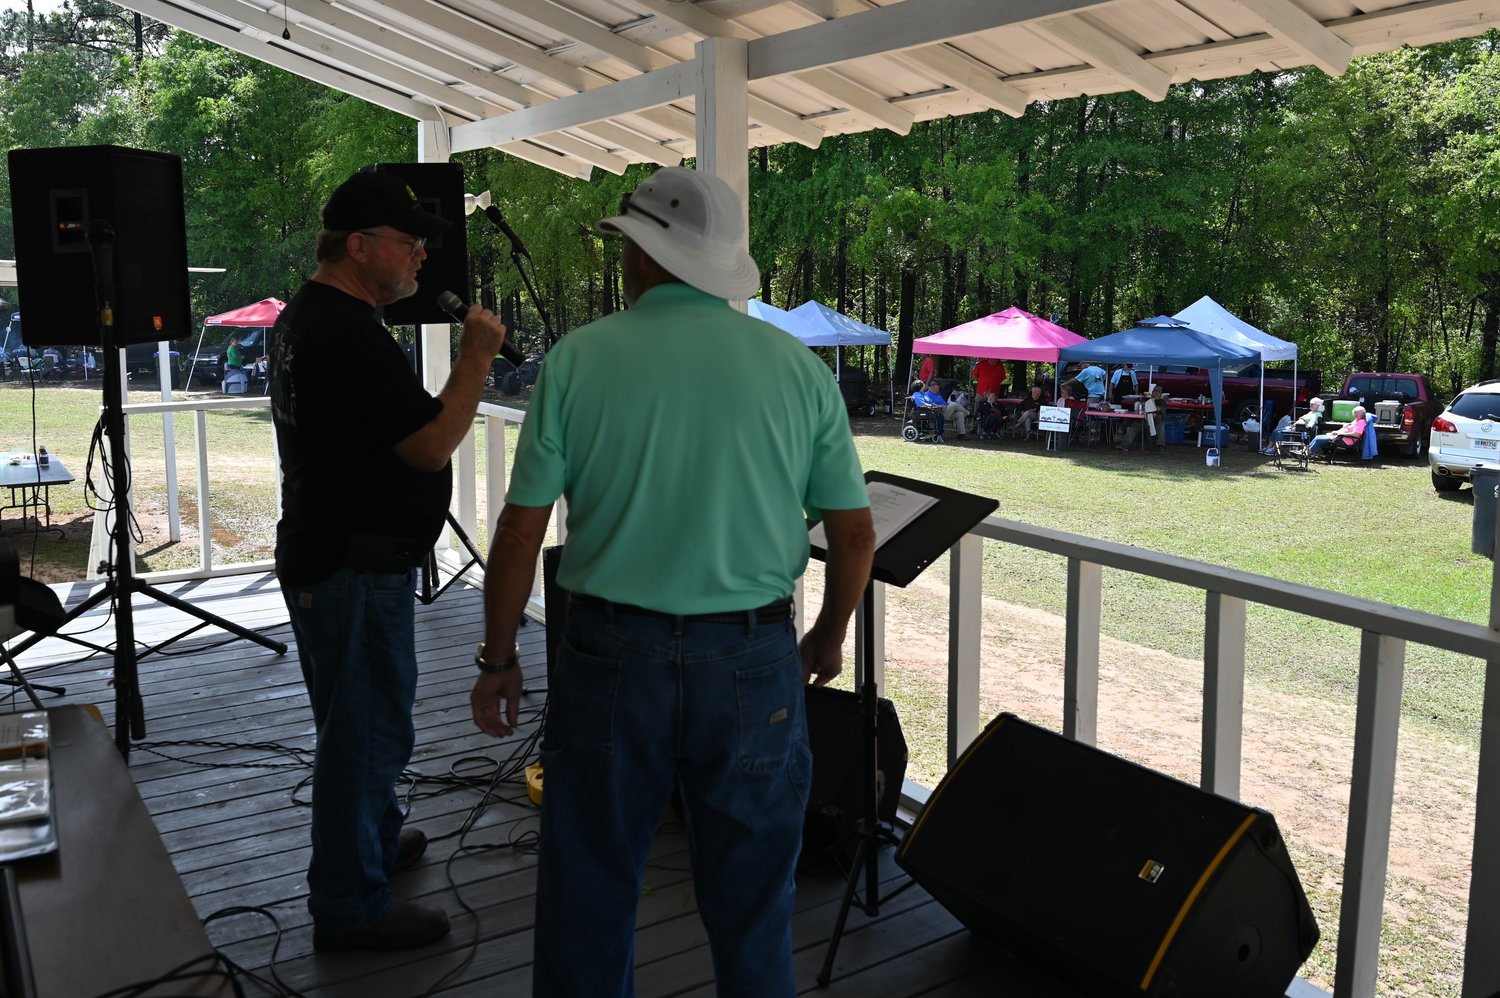 Gospel music is an important part of the days events at the Holy Smoke Christian Barbecue Competition in Preston, Ga., on Saturday, April 1, 2023. (Index/Roger Alford)